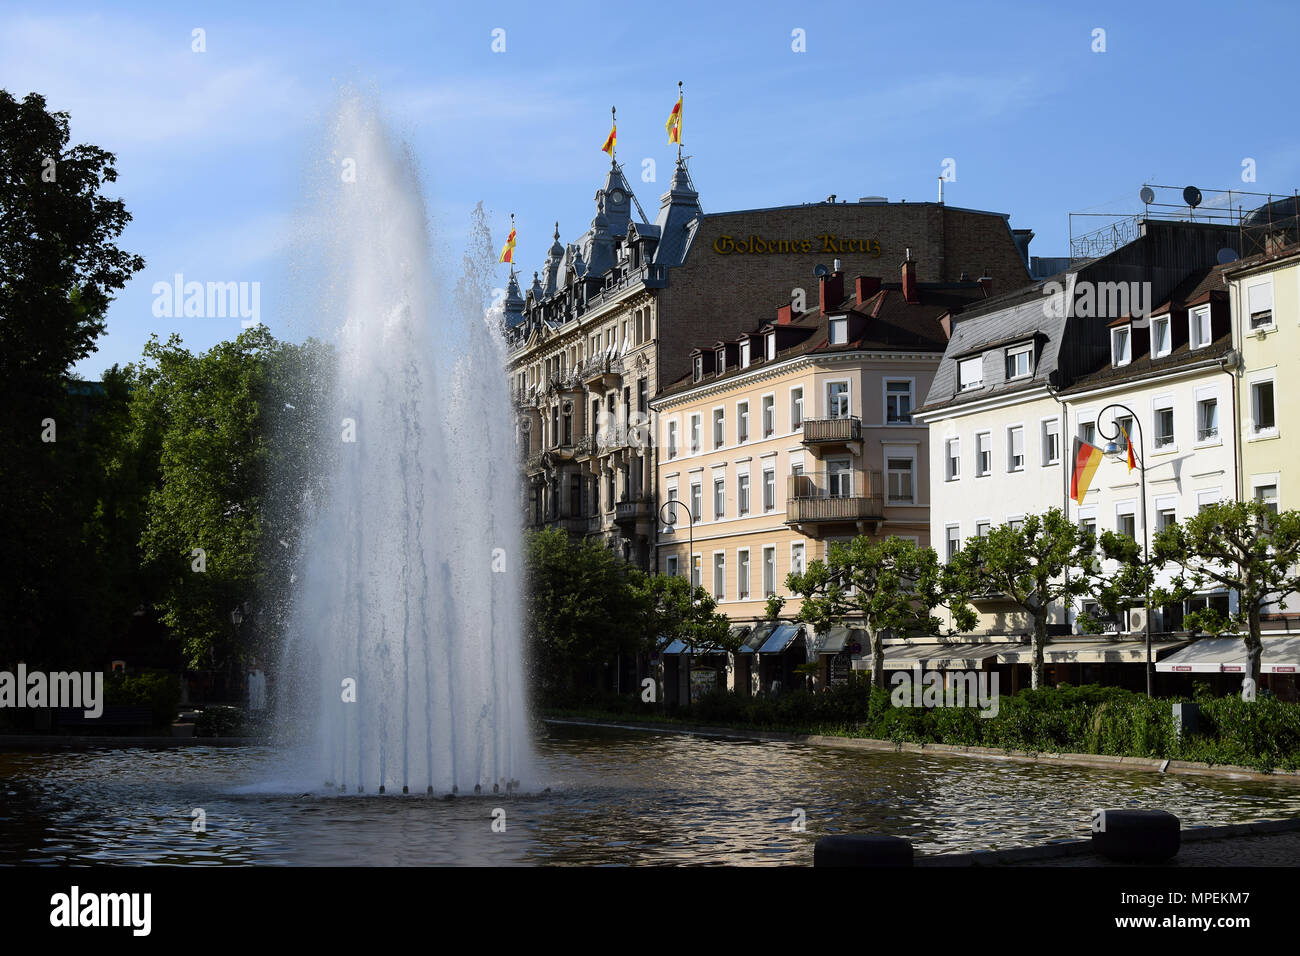 BADEN-BADEN, GERMANY - May 18, 2018: Baden-Baden is a spa town located in the state of Baden-Württemberg in southwestern Germany. Stock Photo